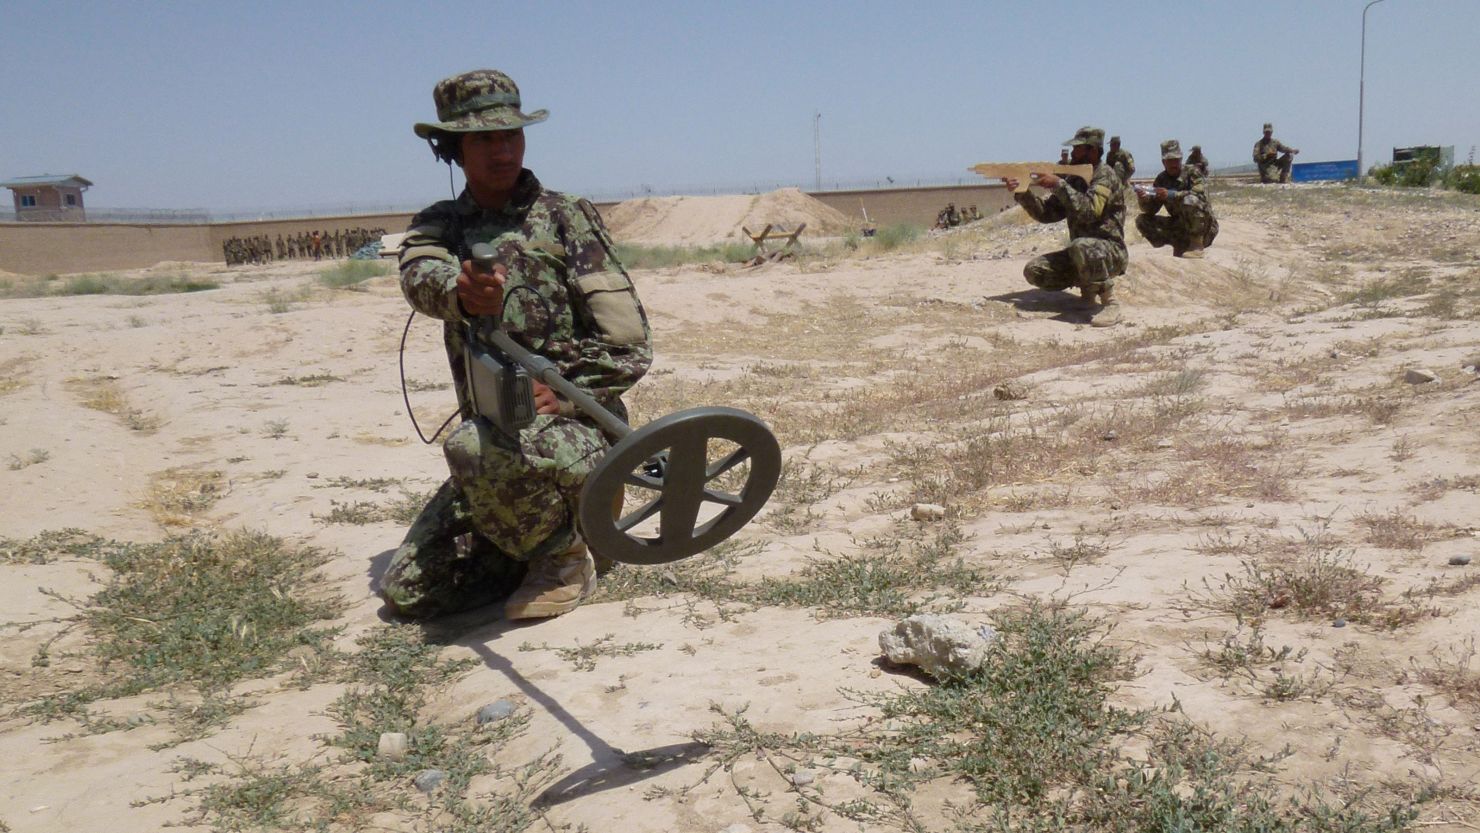 [File photo]  Afghanistan National Army (ANA) take part in a de-mining exercise at Camp Shaheen on June 12, 2013.